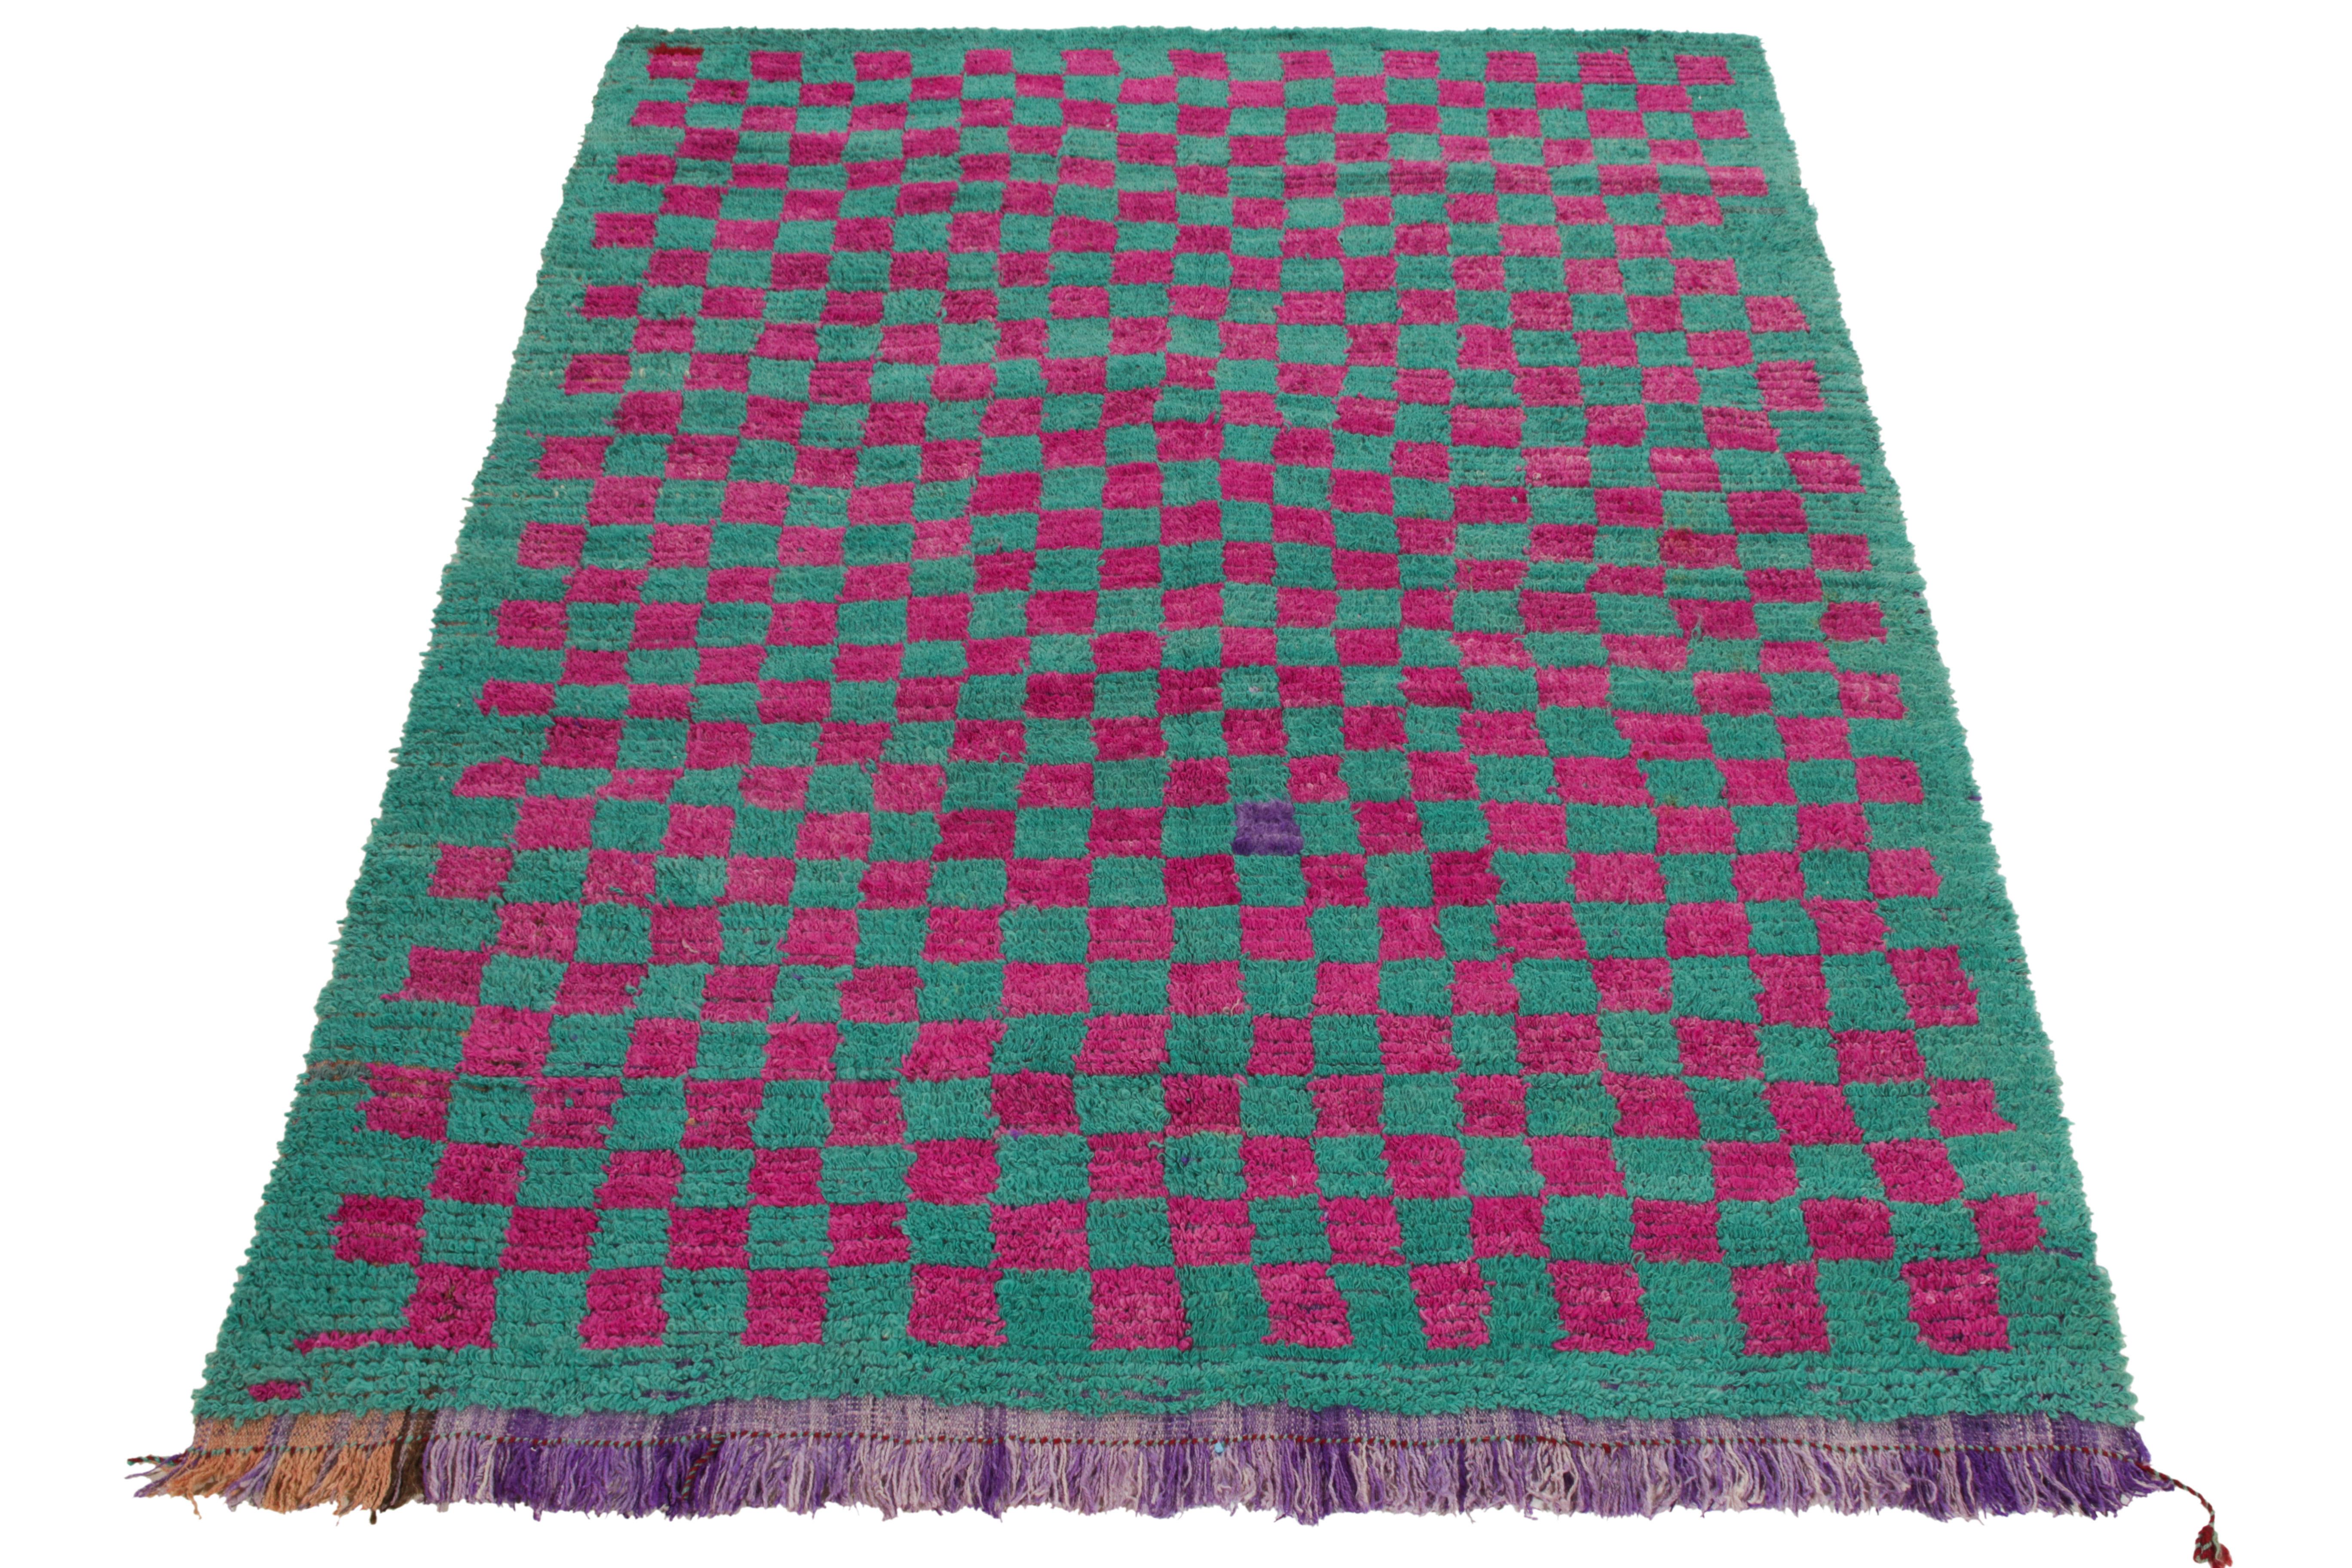 Coming from Turkey circa 1950-1960, this vintage 5 x 7 Tulu rug enjoys a magenta checkered pattern sitting boldly on turquoise for a delicious complement. Hand-knotted in wool, the artistic vision observes gradience in purple & beige tones on the